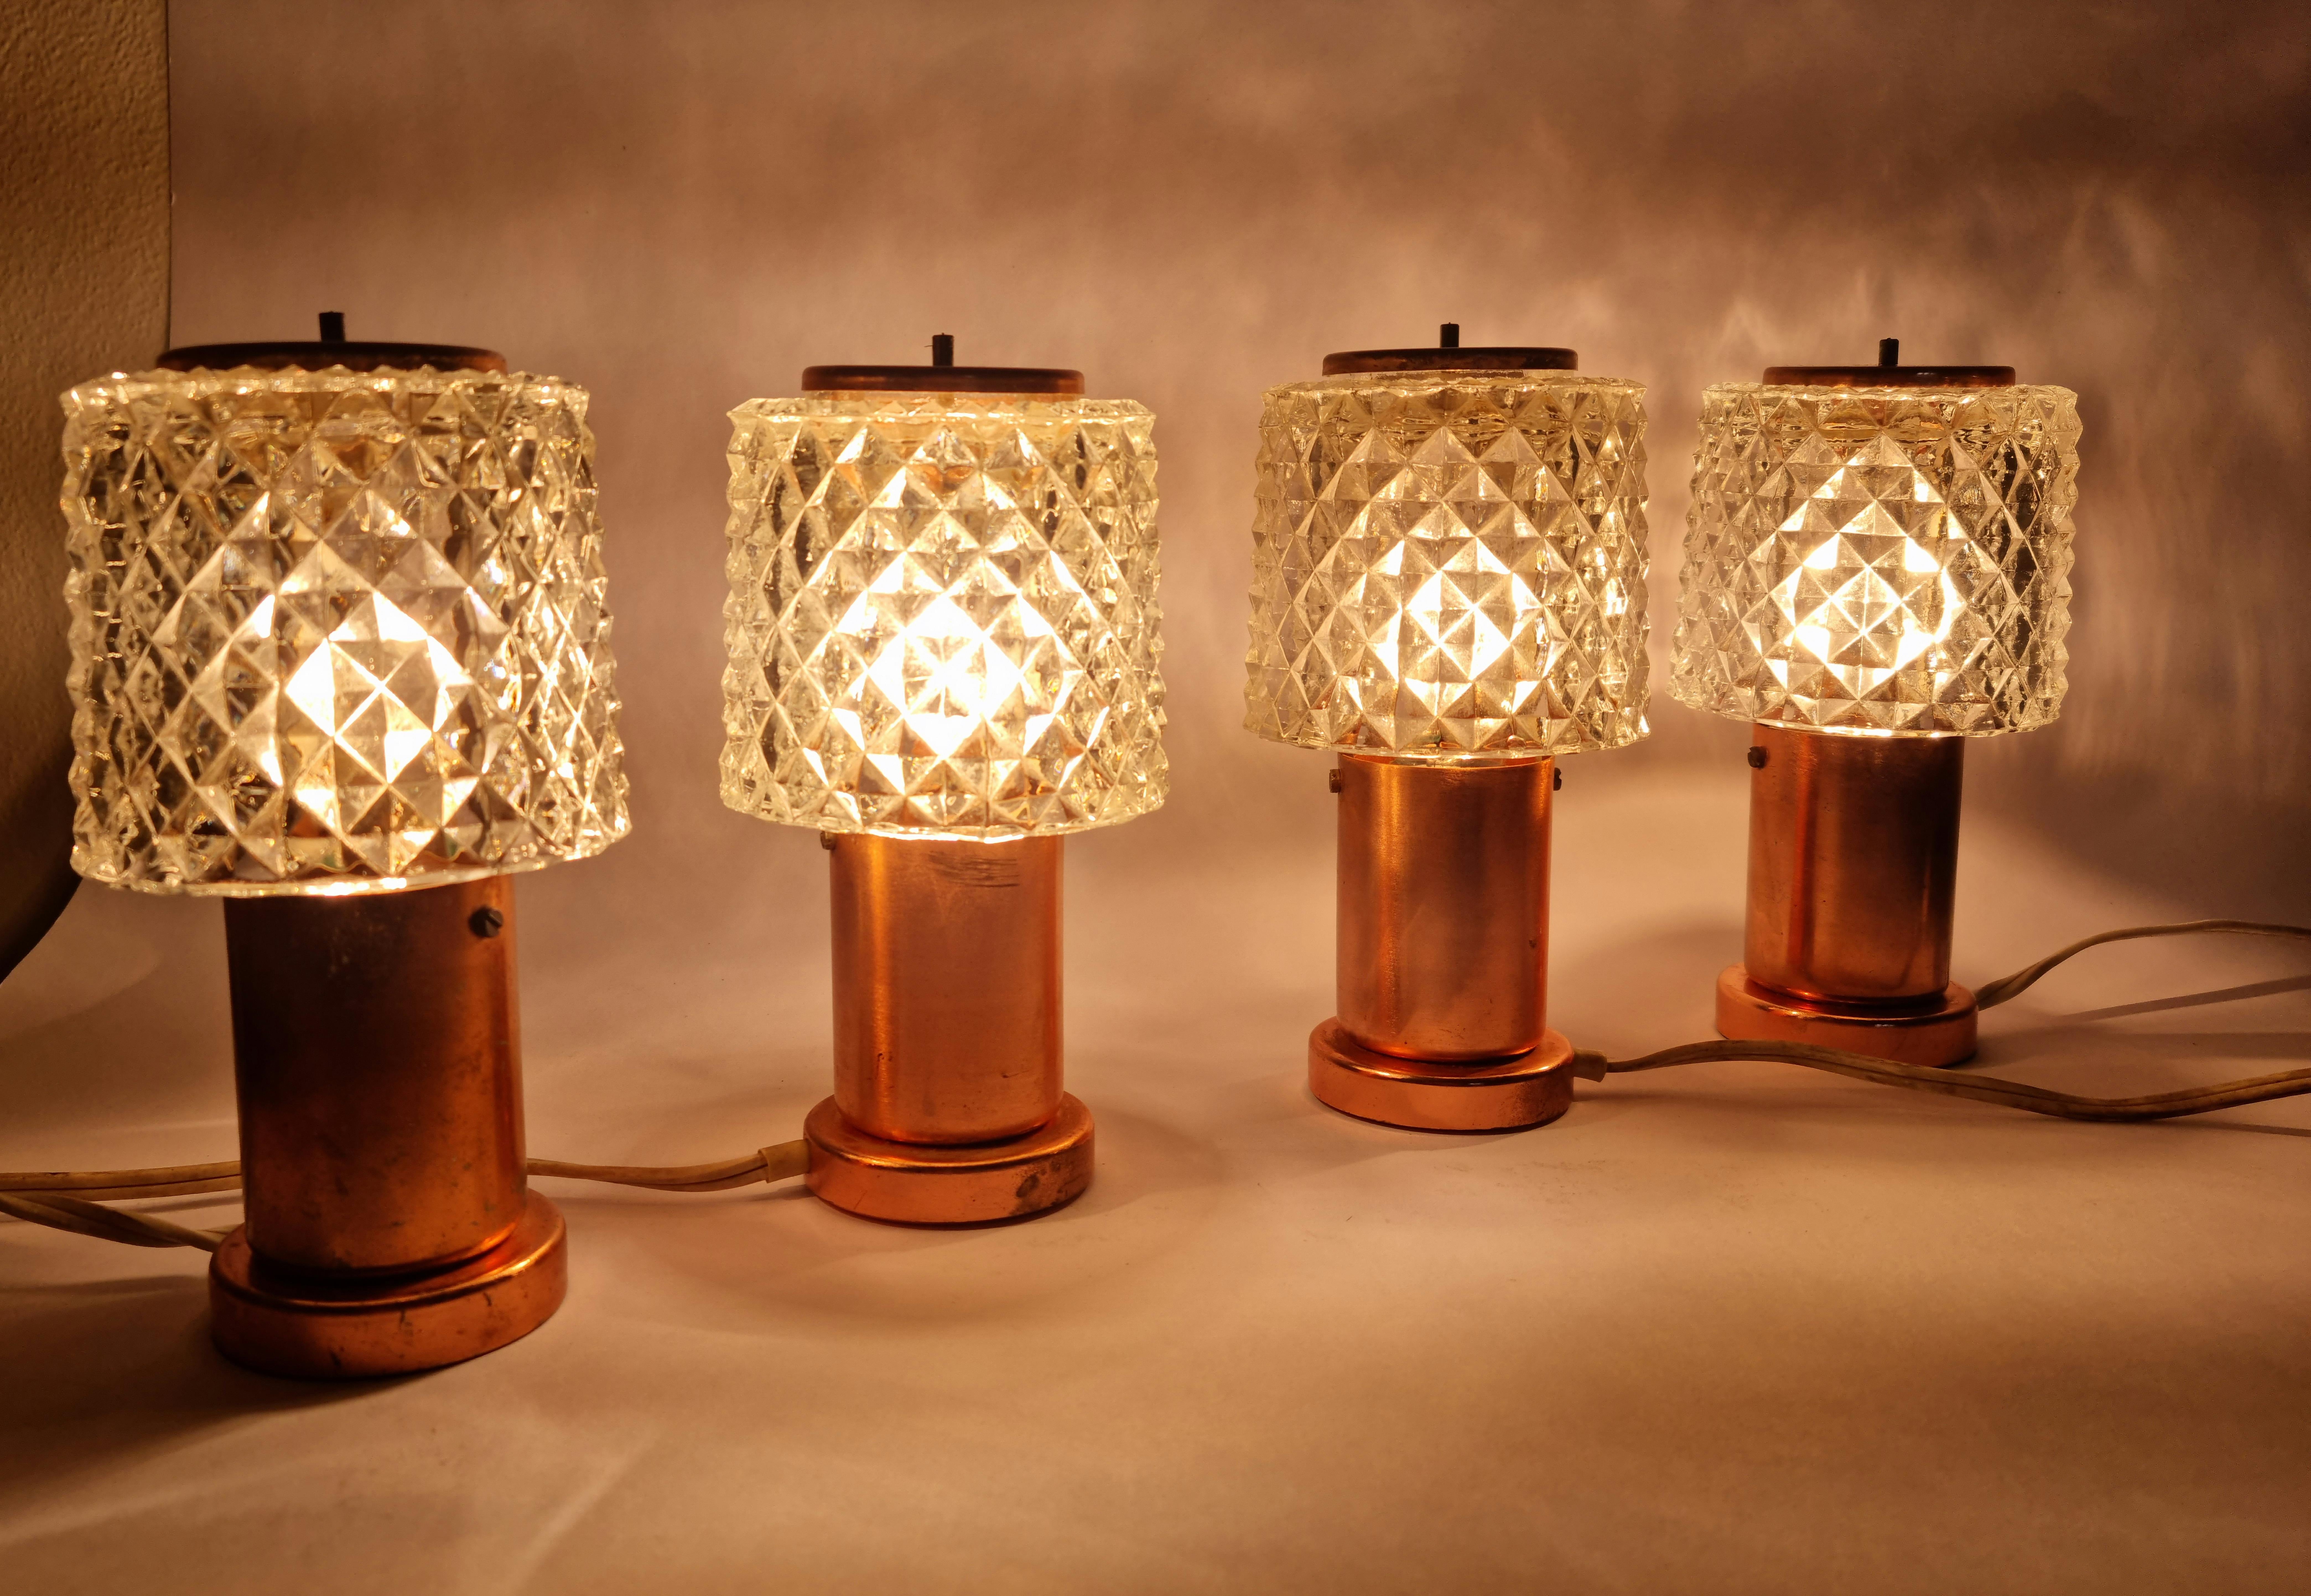 Set of Four Mid-Century Table Lamps Kamenicky Senov, 1970s For Sale 5